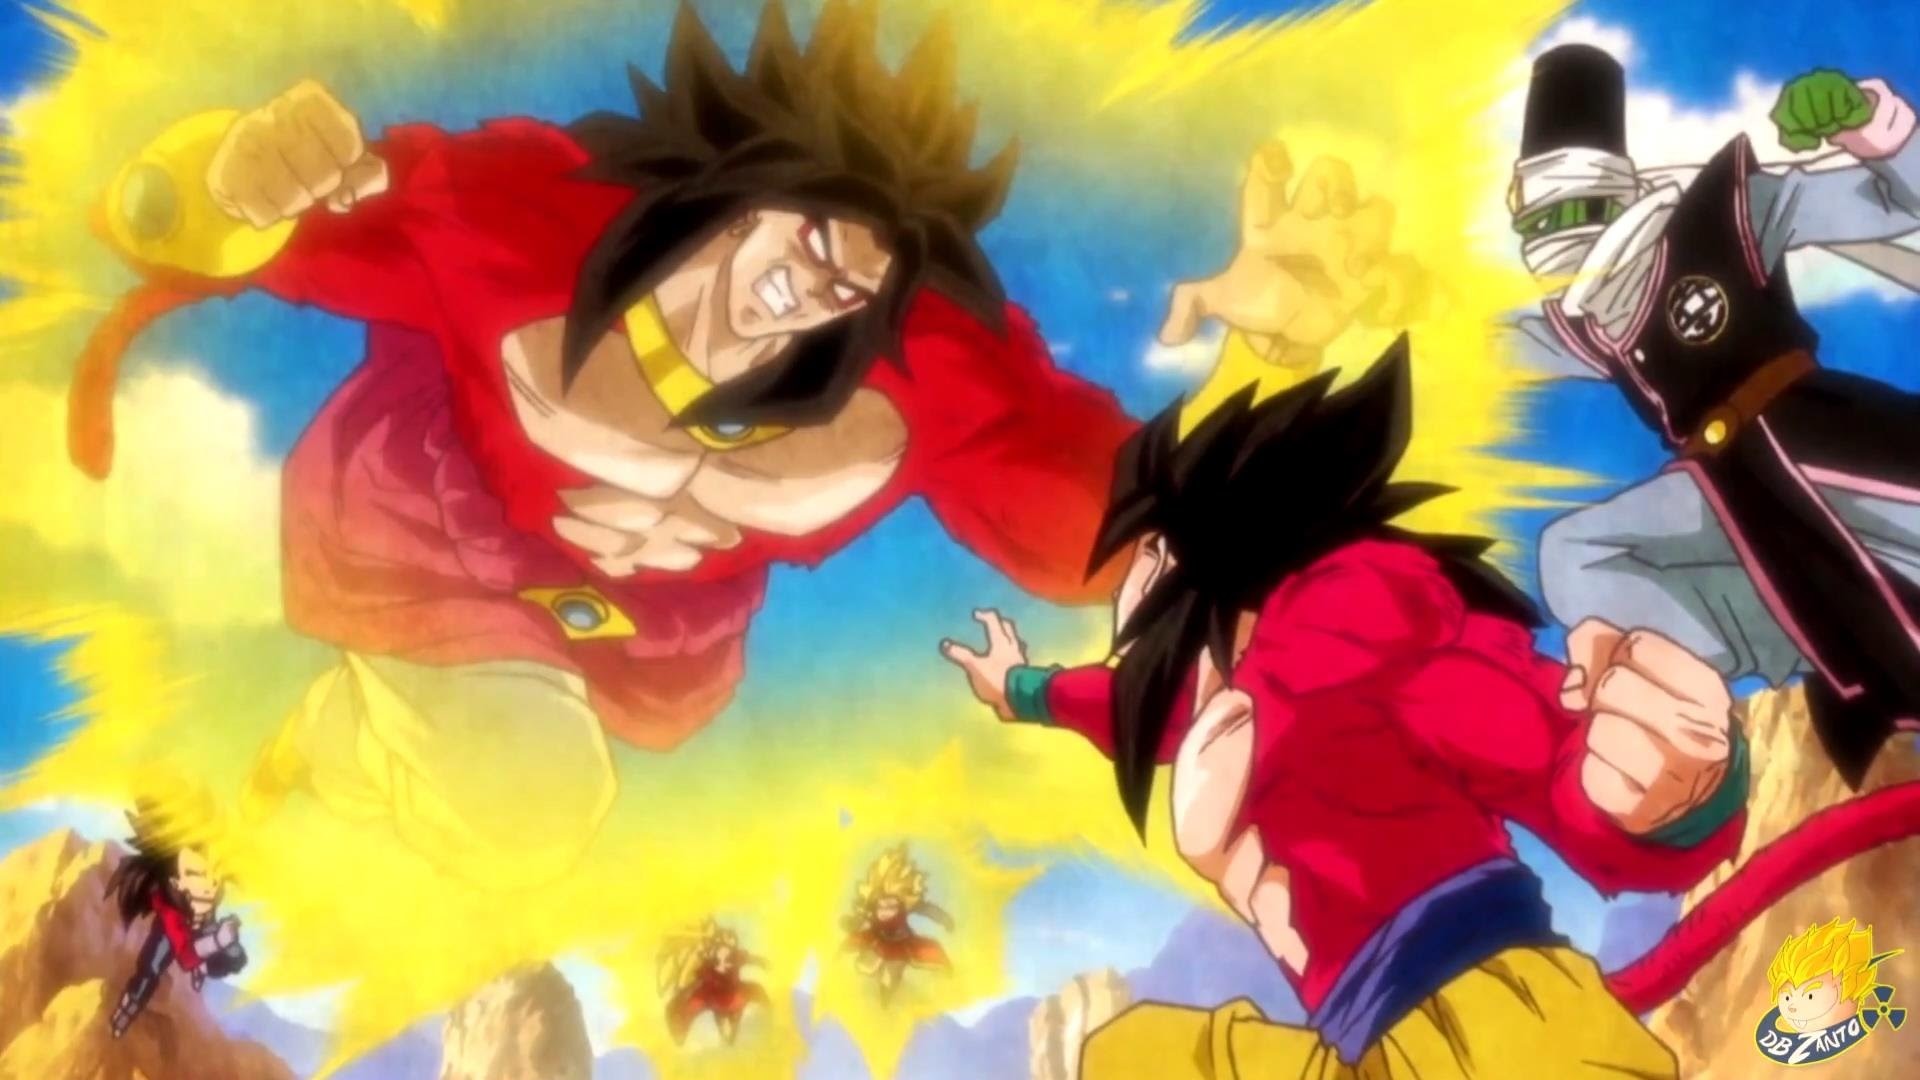 1920x1080 Broly Super Saiyin 4 - Entering the fight.